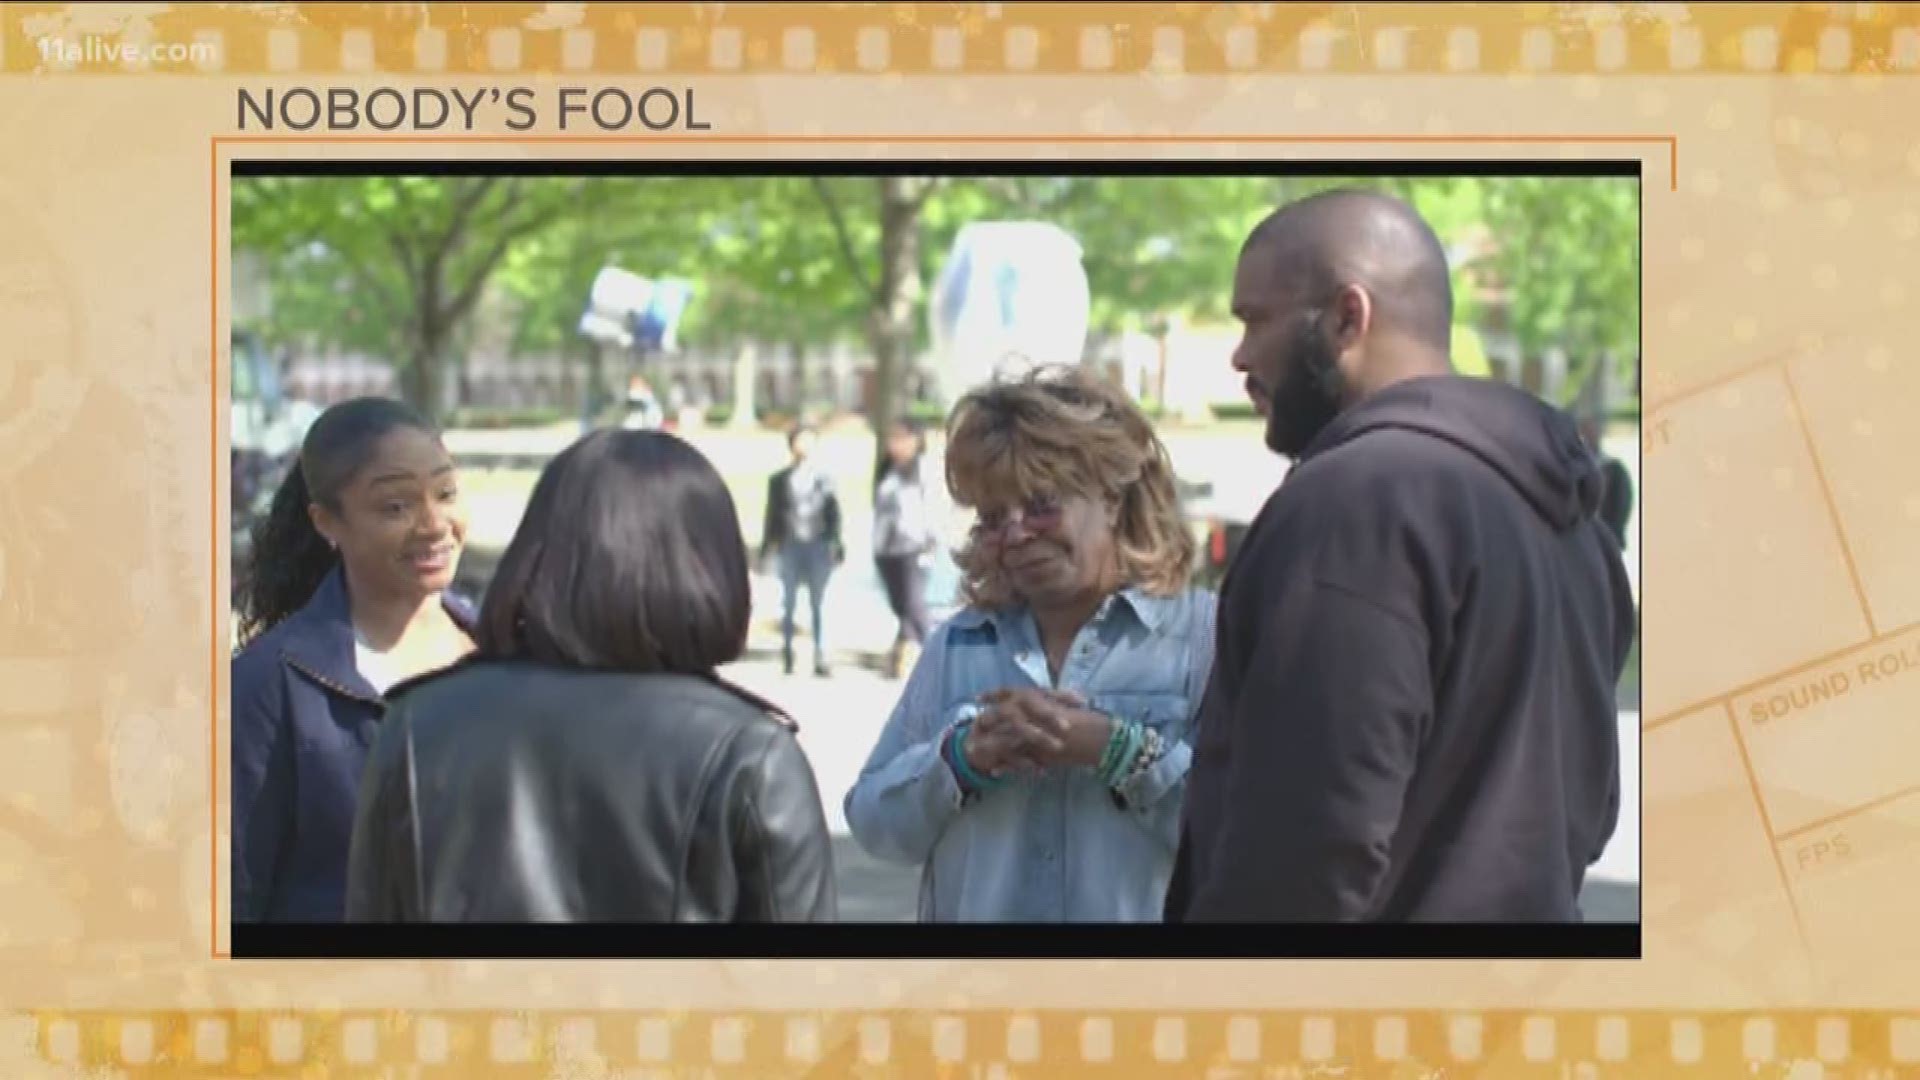 'Nobody's Fool' starring Tiffany Haddish, Tika Sumpter, and Omari Hardwick opens nationwide today. The romantic comedy was produced here at Atlanta at Tyler Perry Studios. We caught up with Tyler Perry during the premiere last night Atlantic Station.